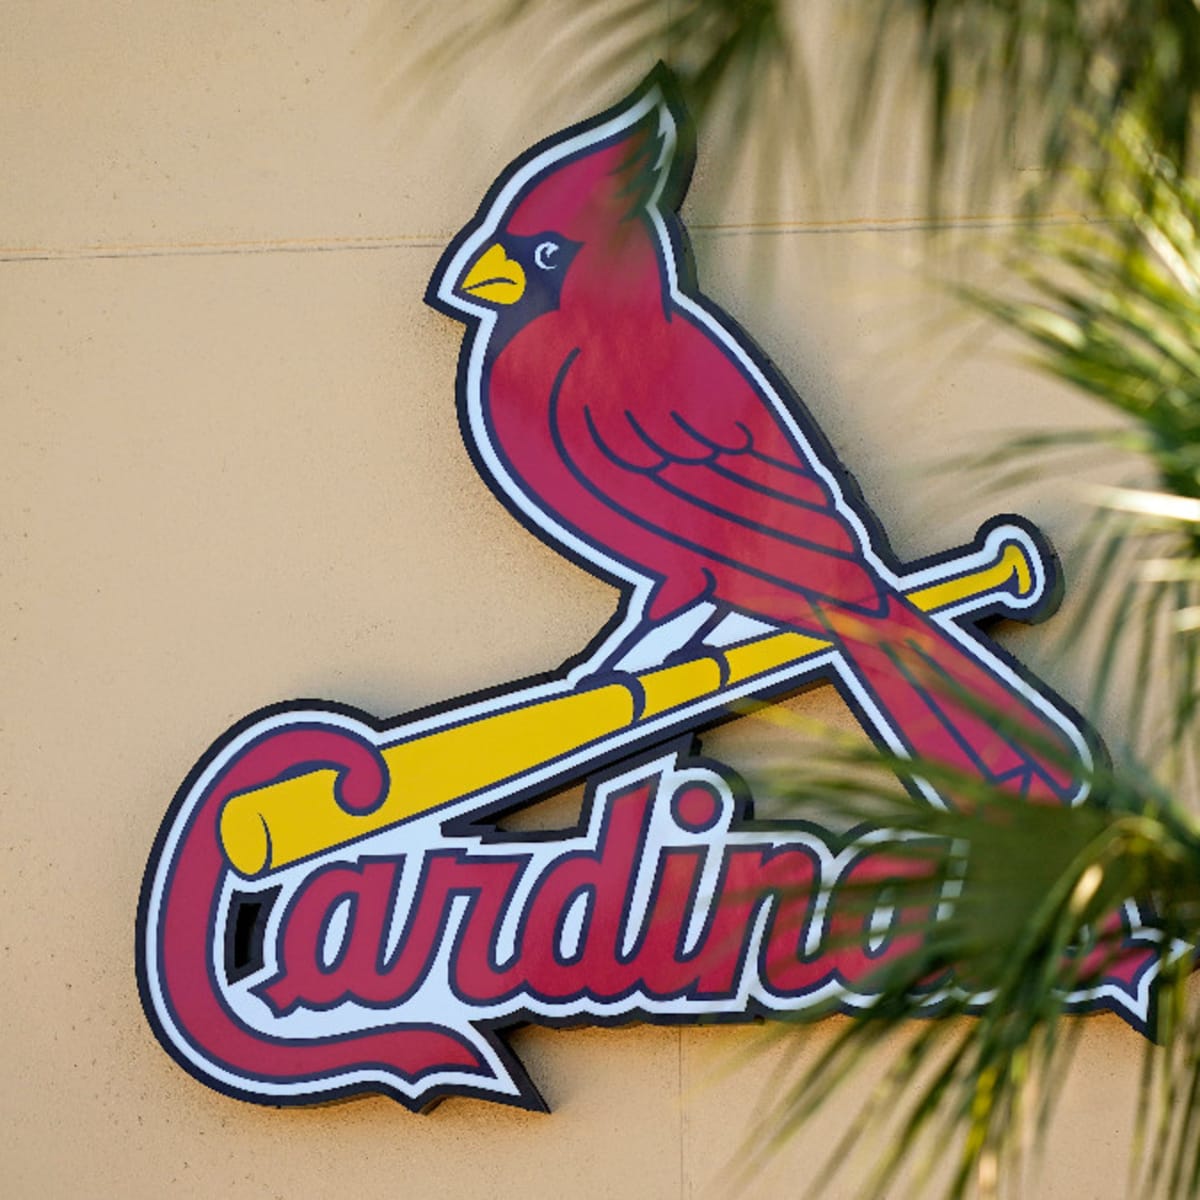 St. Louis Cardinals fans exasperated as 2023 season continues to go down  the drain: First time in my life seeing the Cardinals be this bad